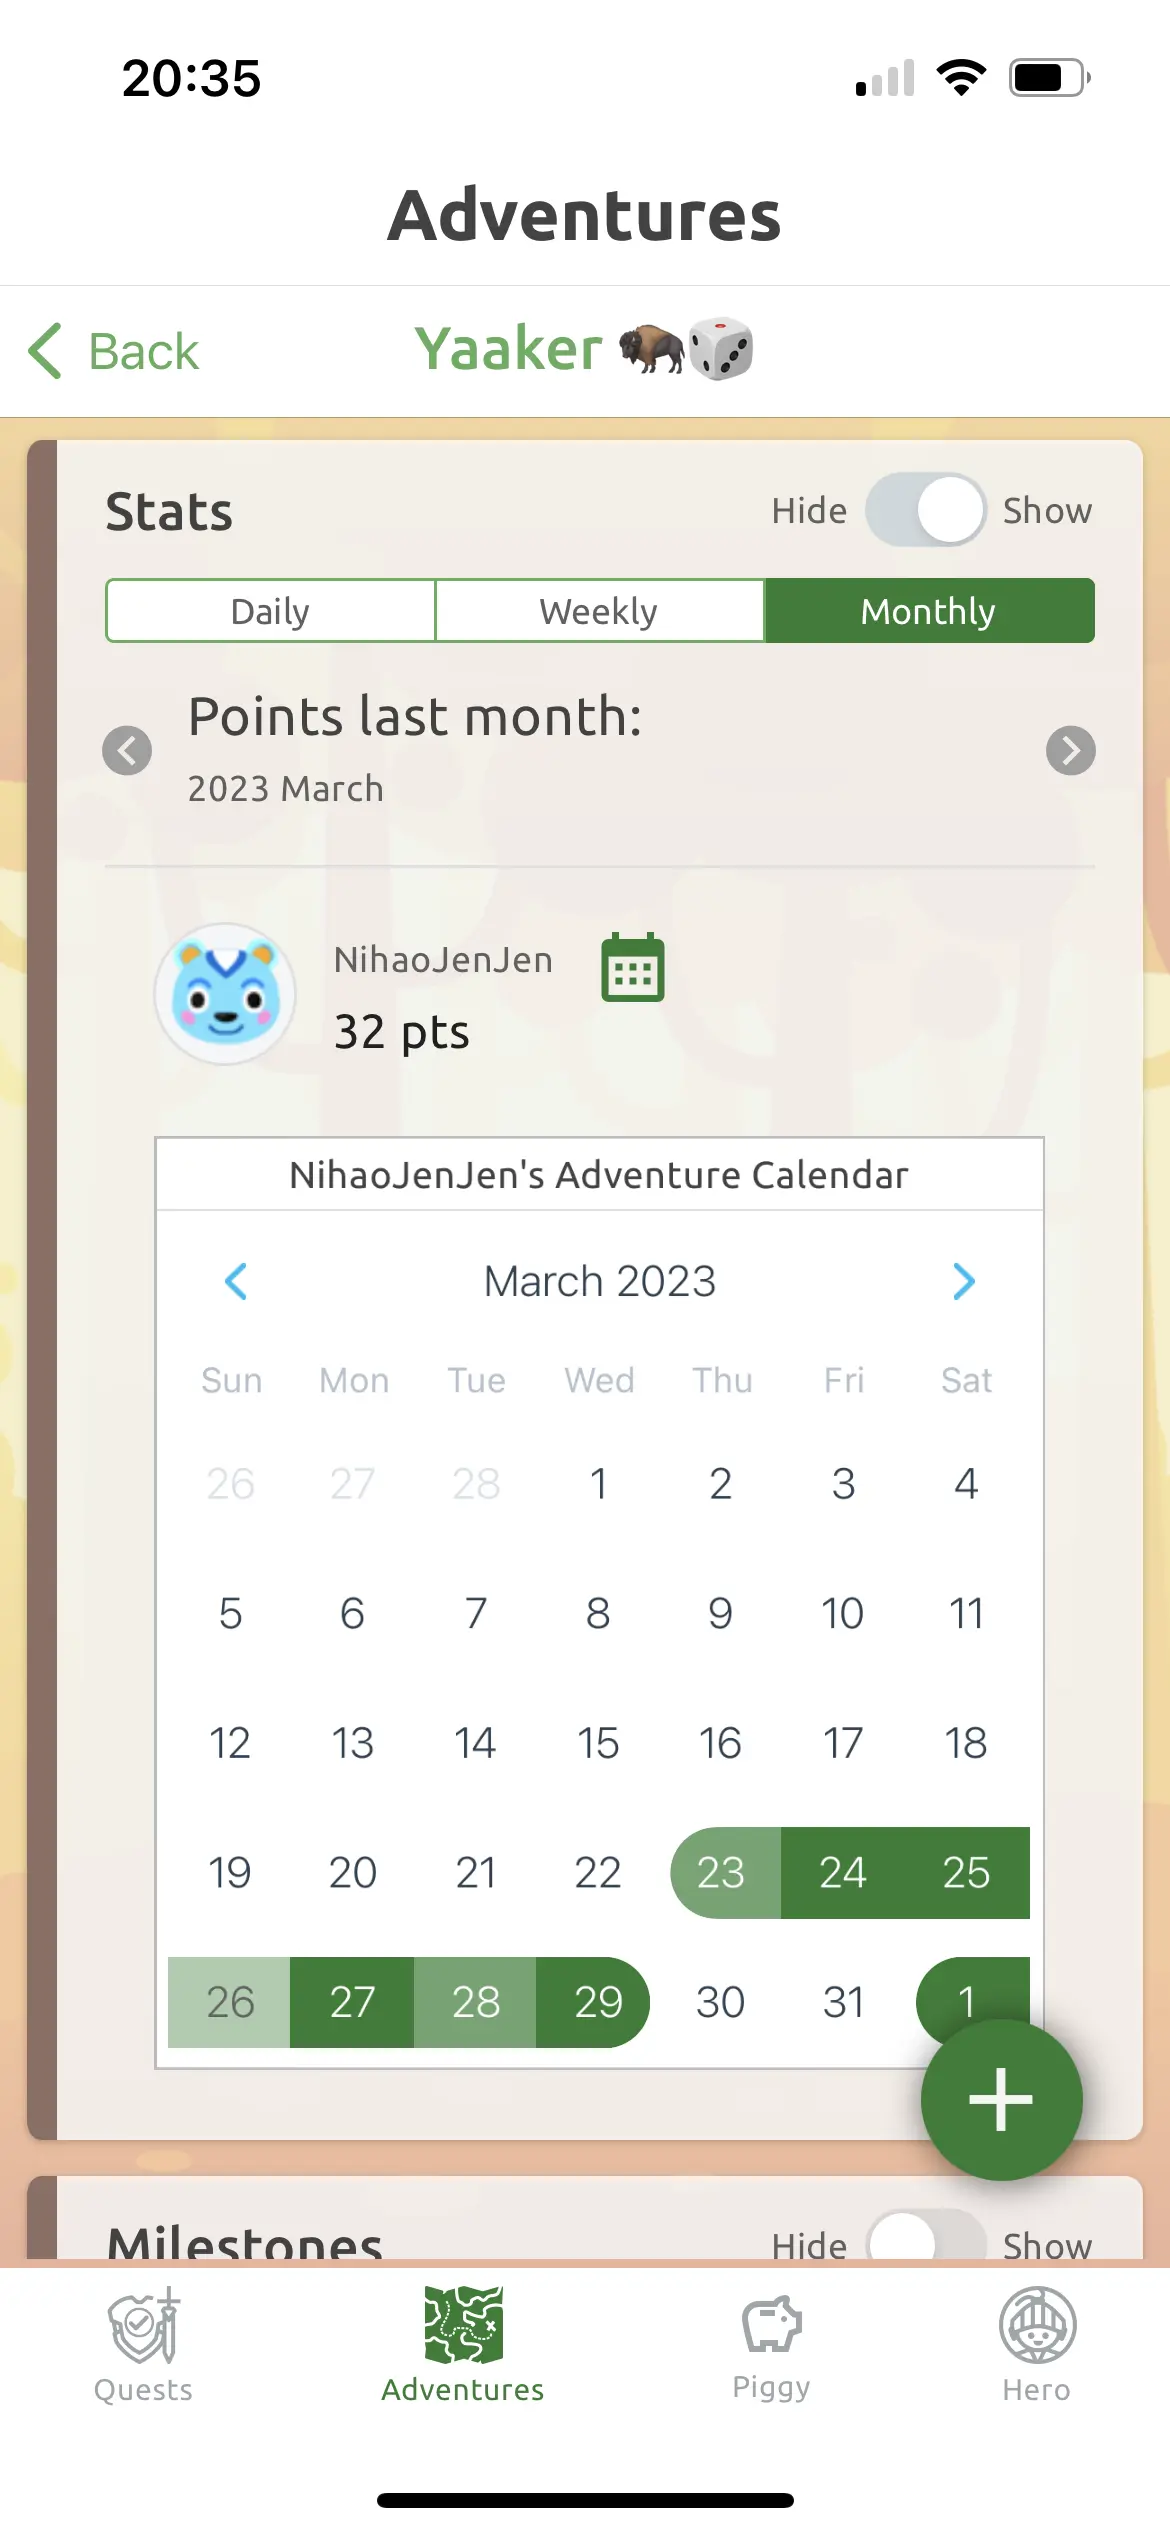 My activity calendar for Yaaker (March)